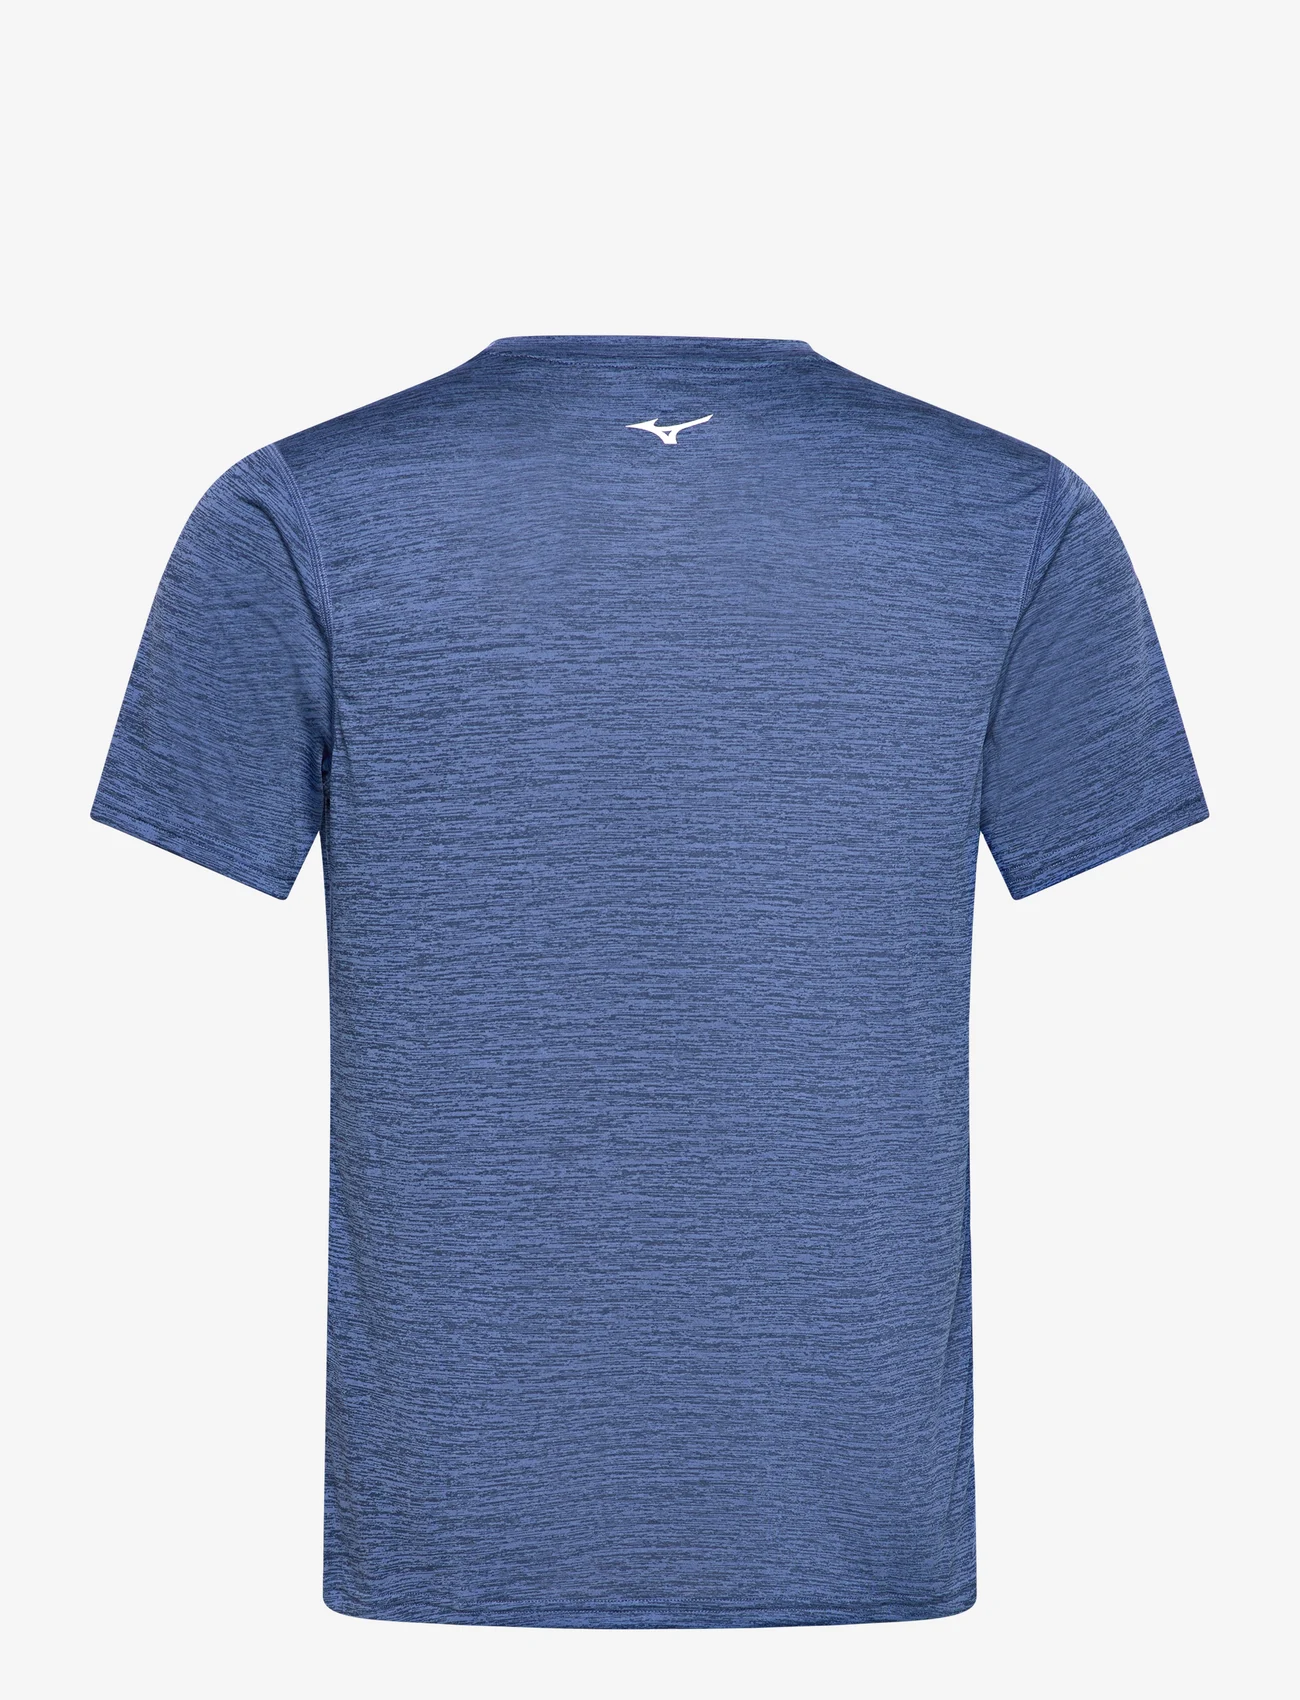 Mizuno - Core RB Tee(M) - short-sleeved t-shirts - federal blue - 1